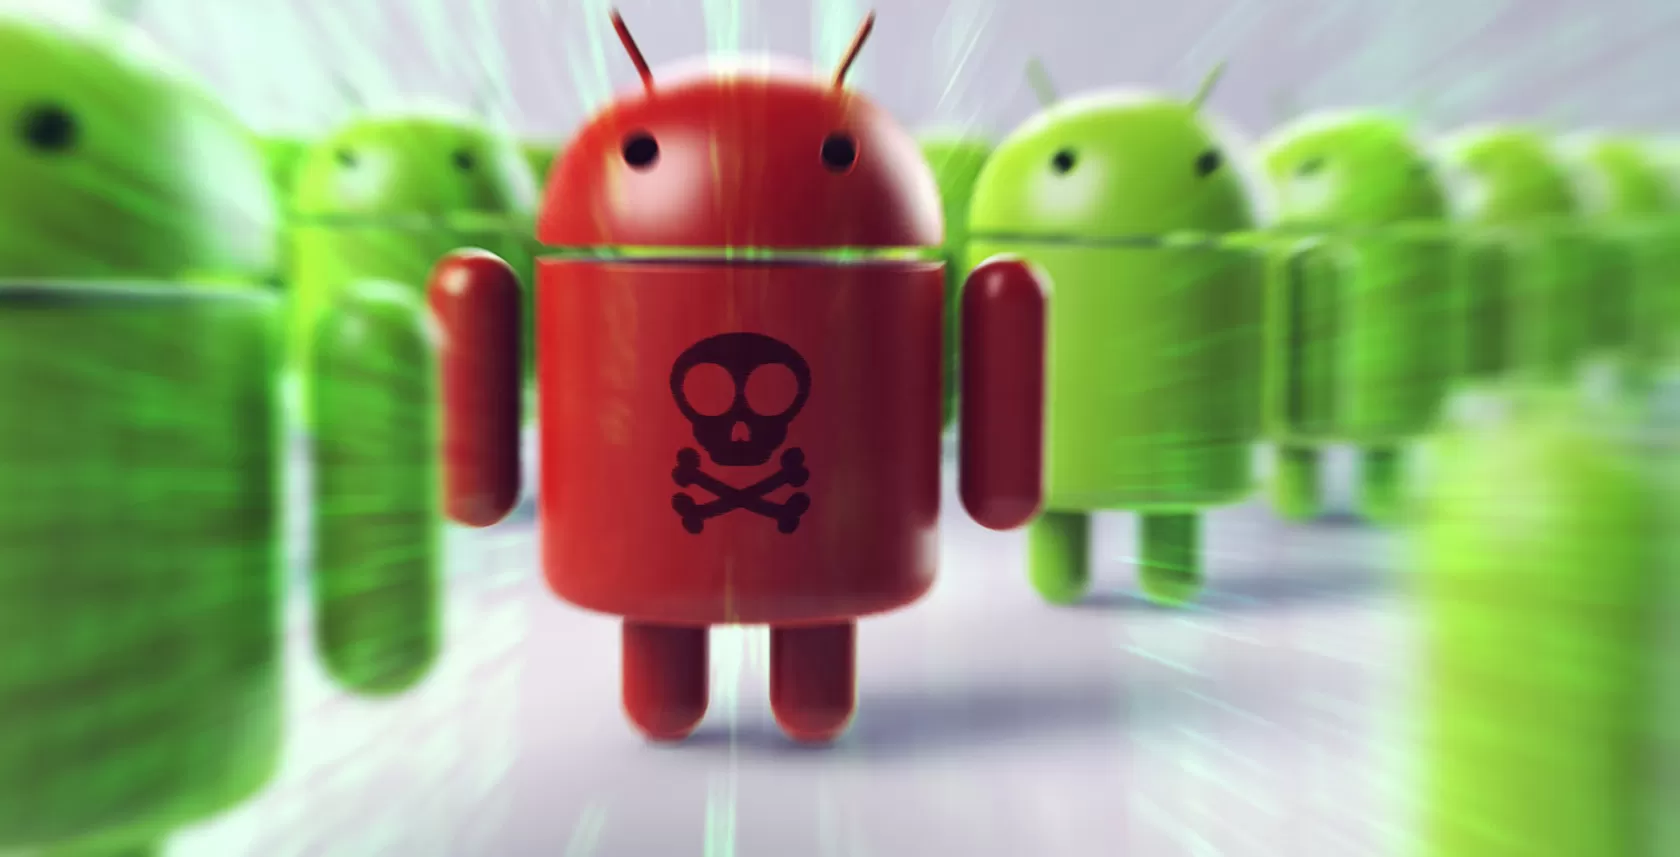 Beware Of This Spyware On Android Phones